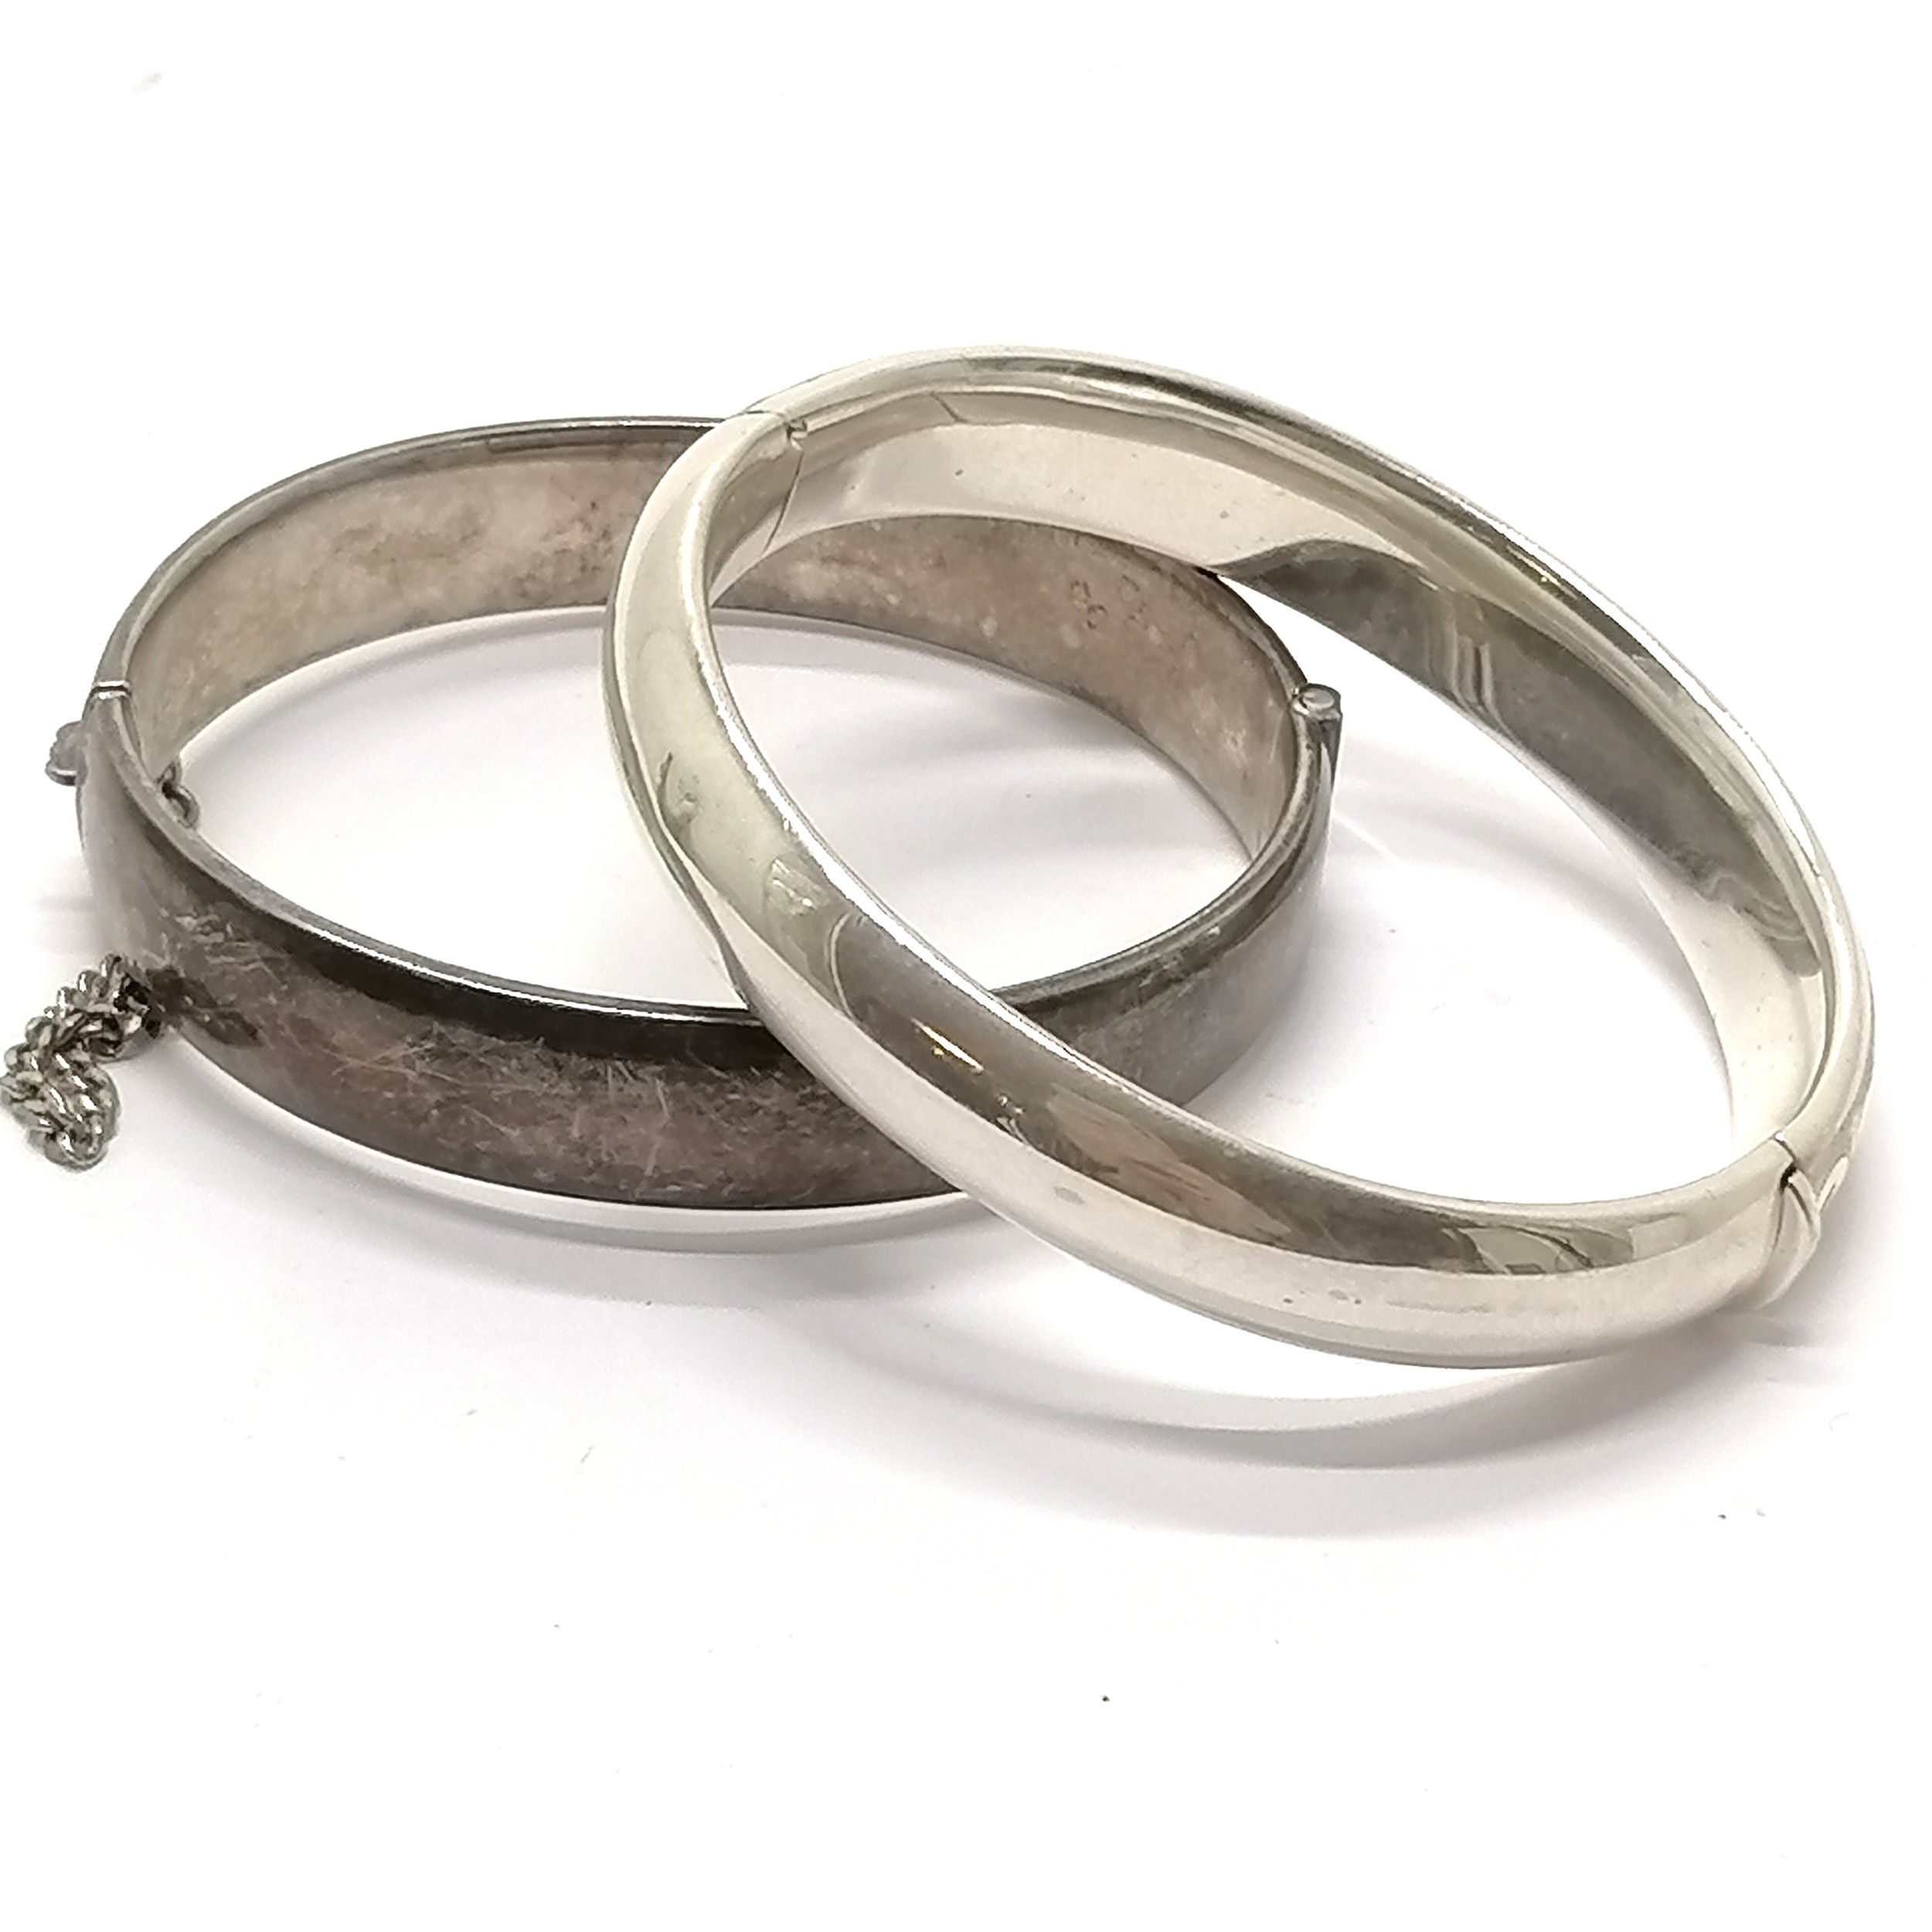 2 x silver hallmarked bangles with engraving to fronts - 52g ~ no obvious damage - Image 2 of 2